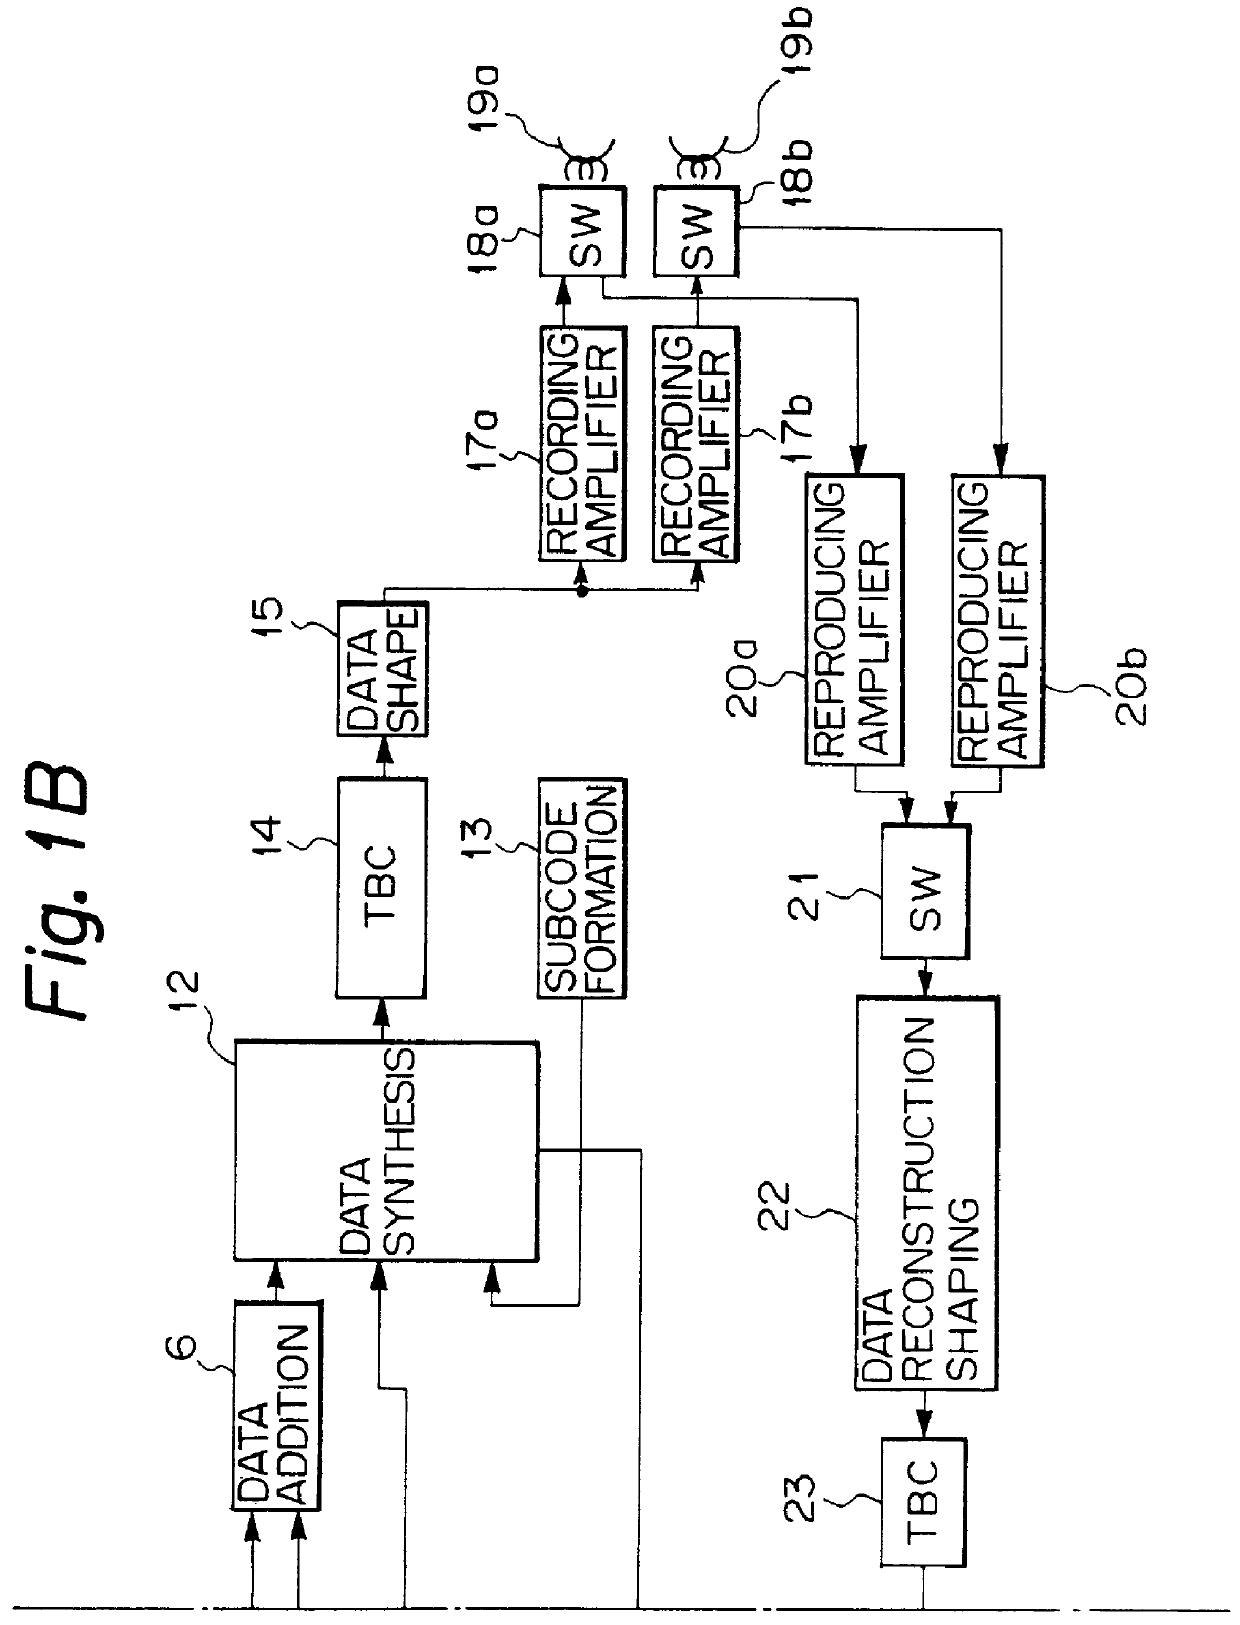 Method and apparatus for determining information and a cassette for use therewith